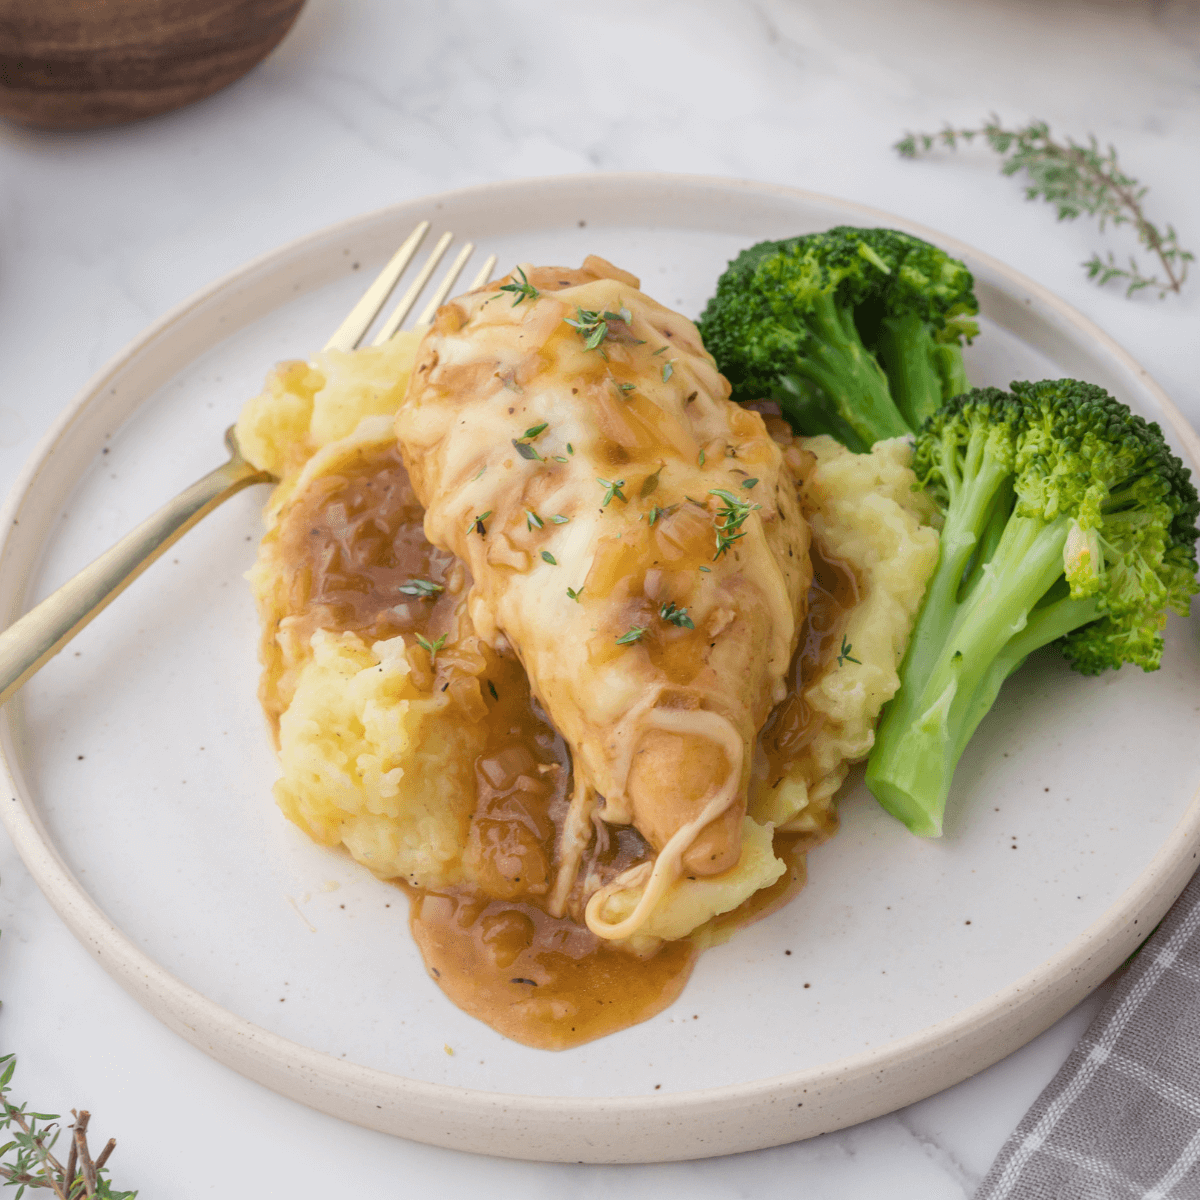 French Onion Chicken on bed of mashed potatoes with broccoli.